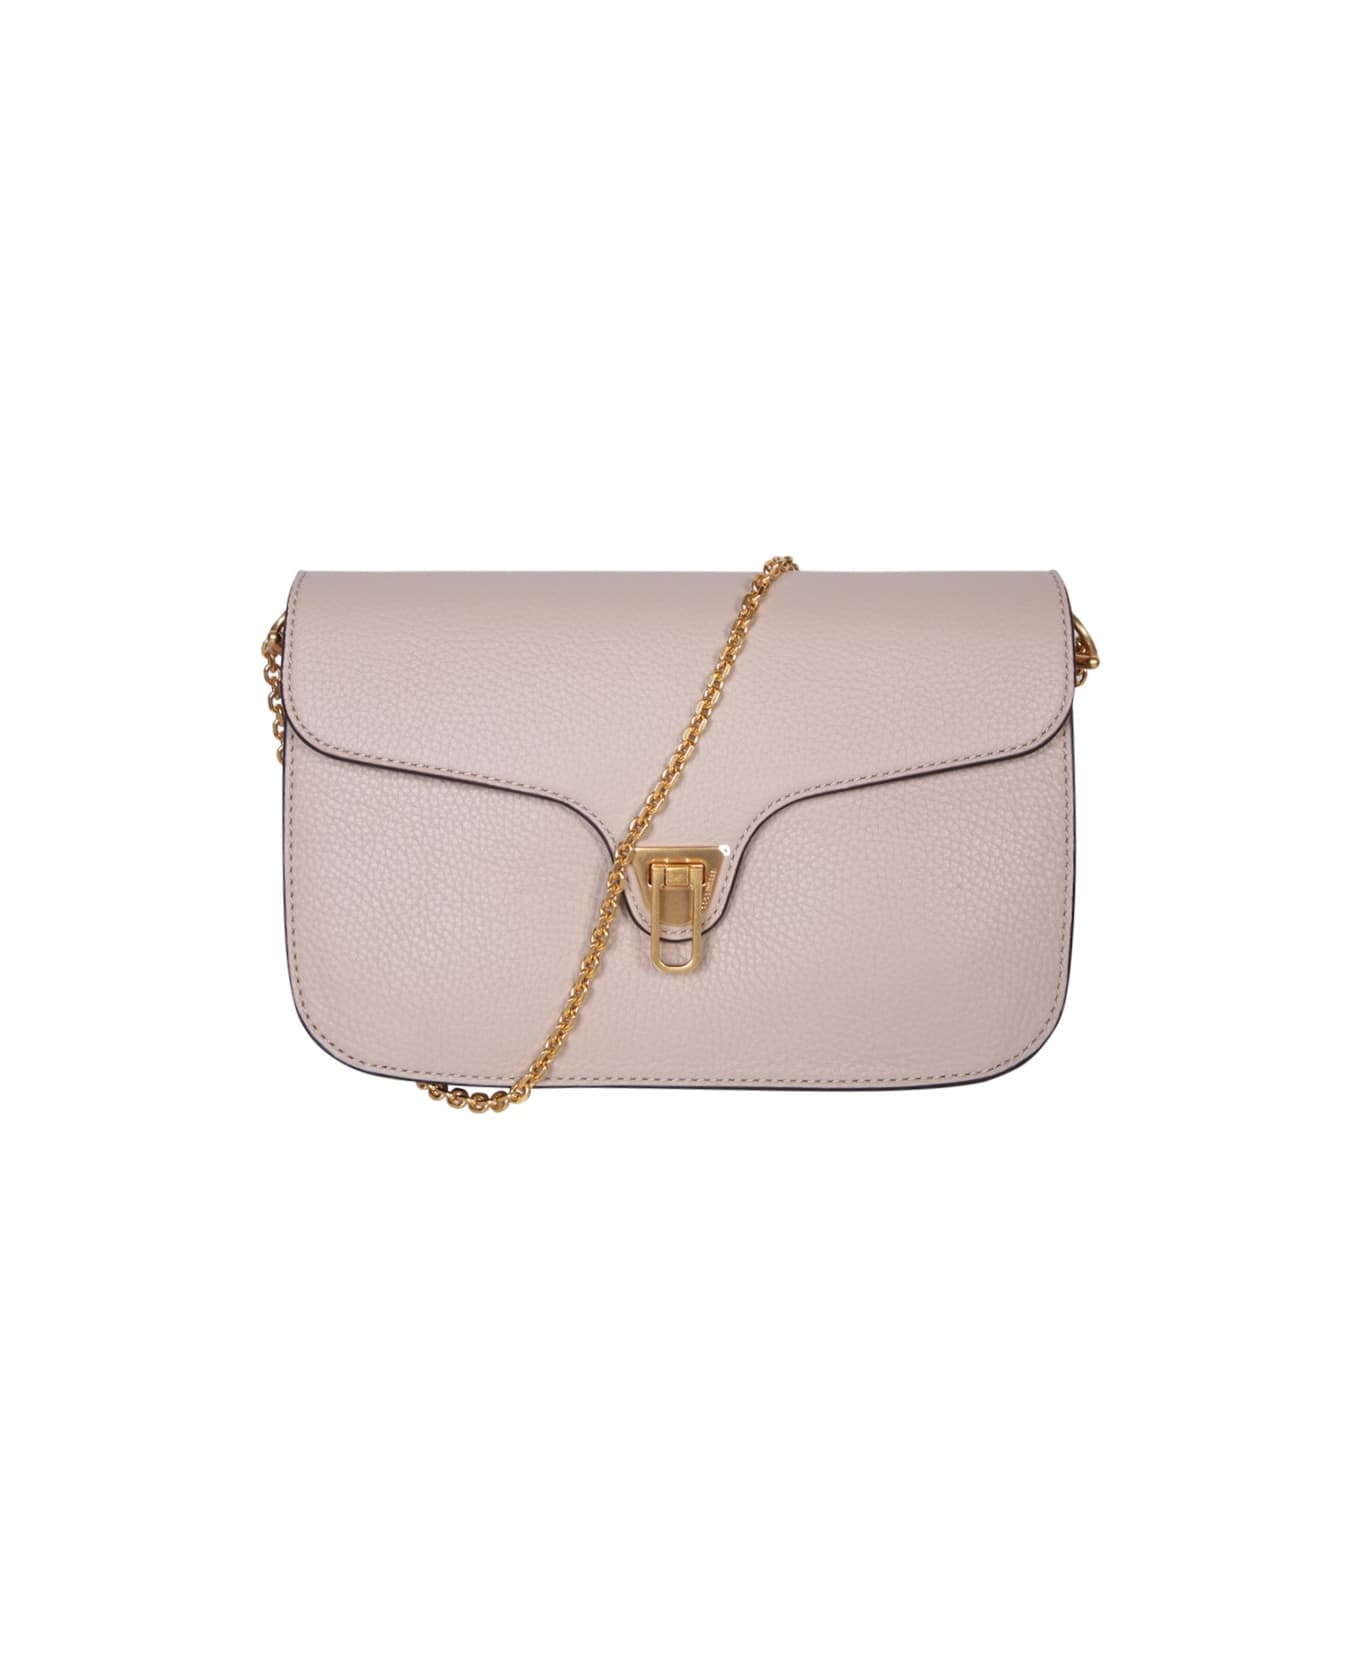 Coccinelle Beat Soft Shoulder Bag In Powder - Pink ショルダーバッグ